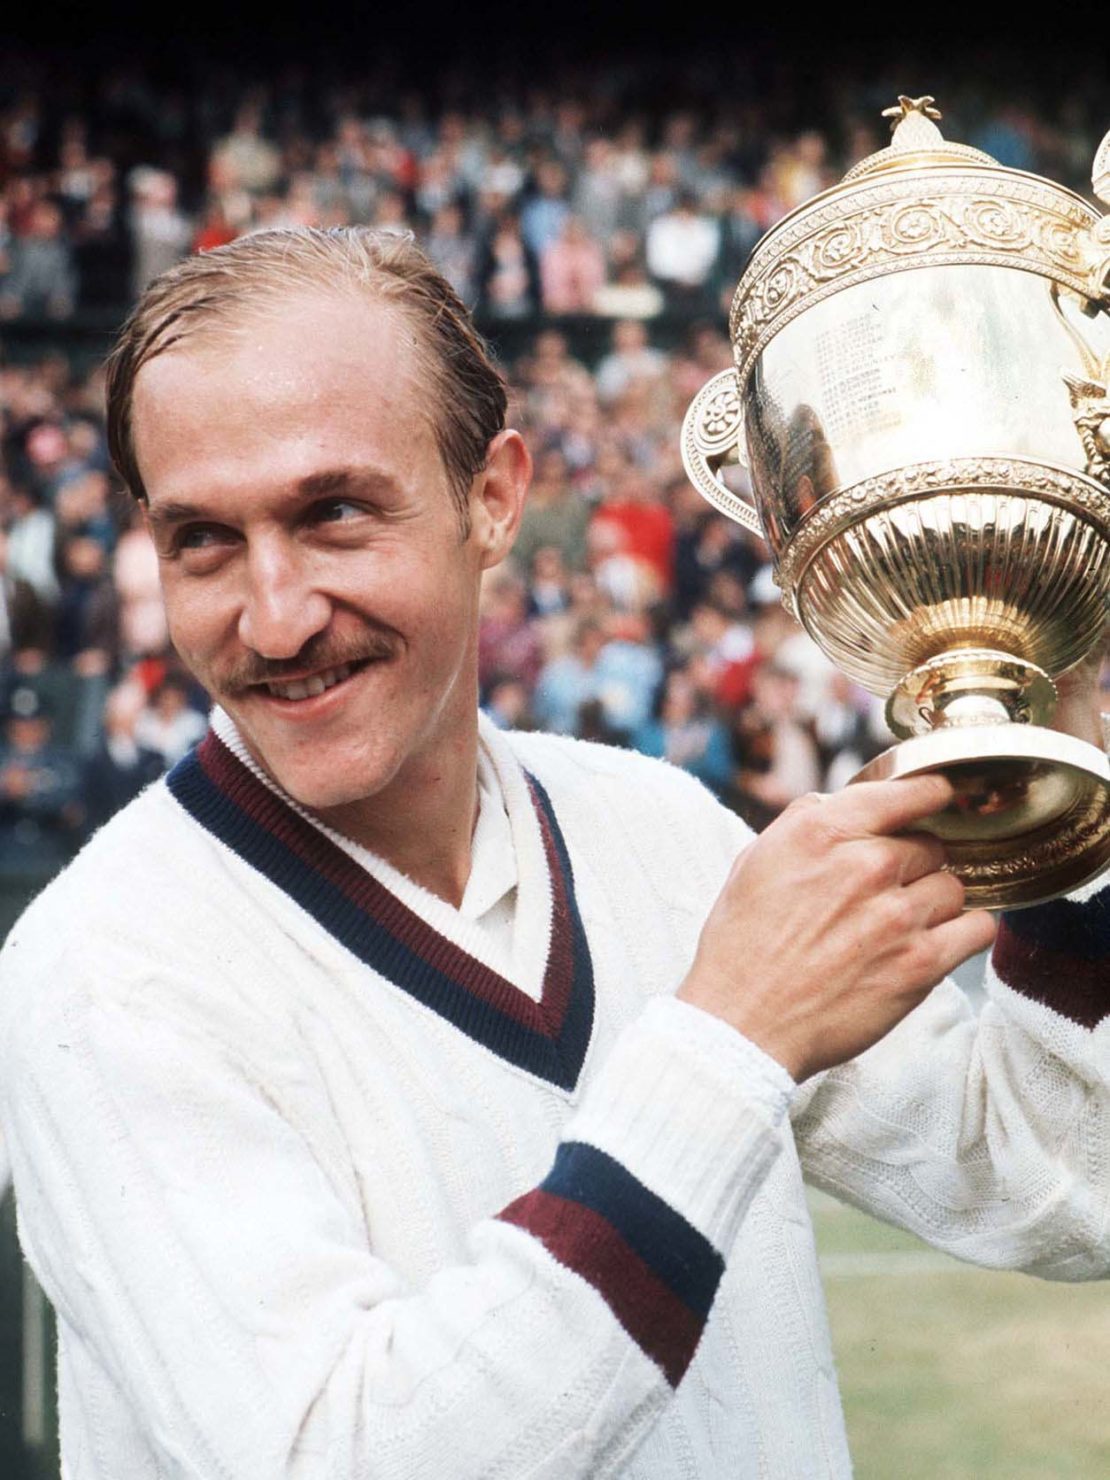 Stan Smith holds up the Wimbledon trophy in 1972